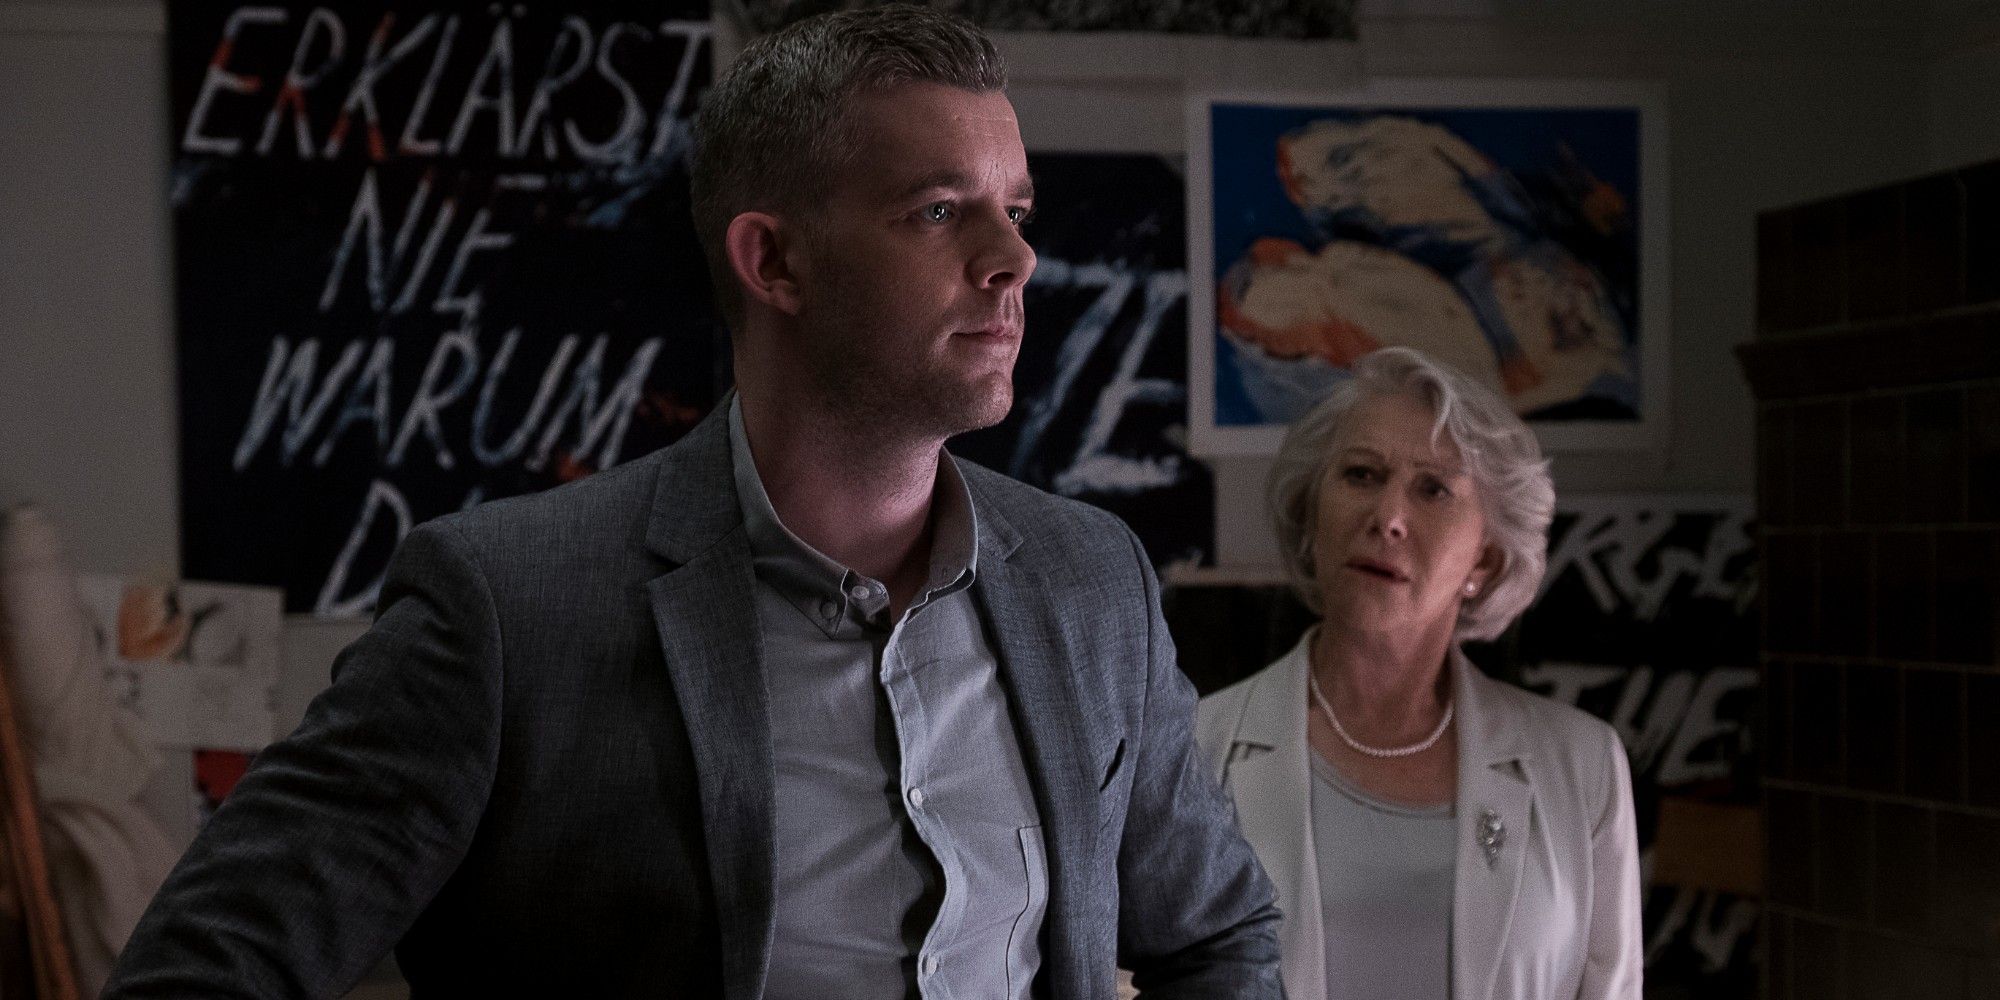 Russell Tovey and Helen Mirren in The Good Liar